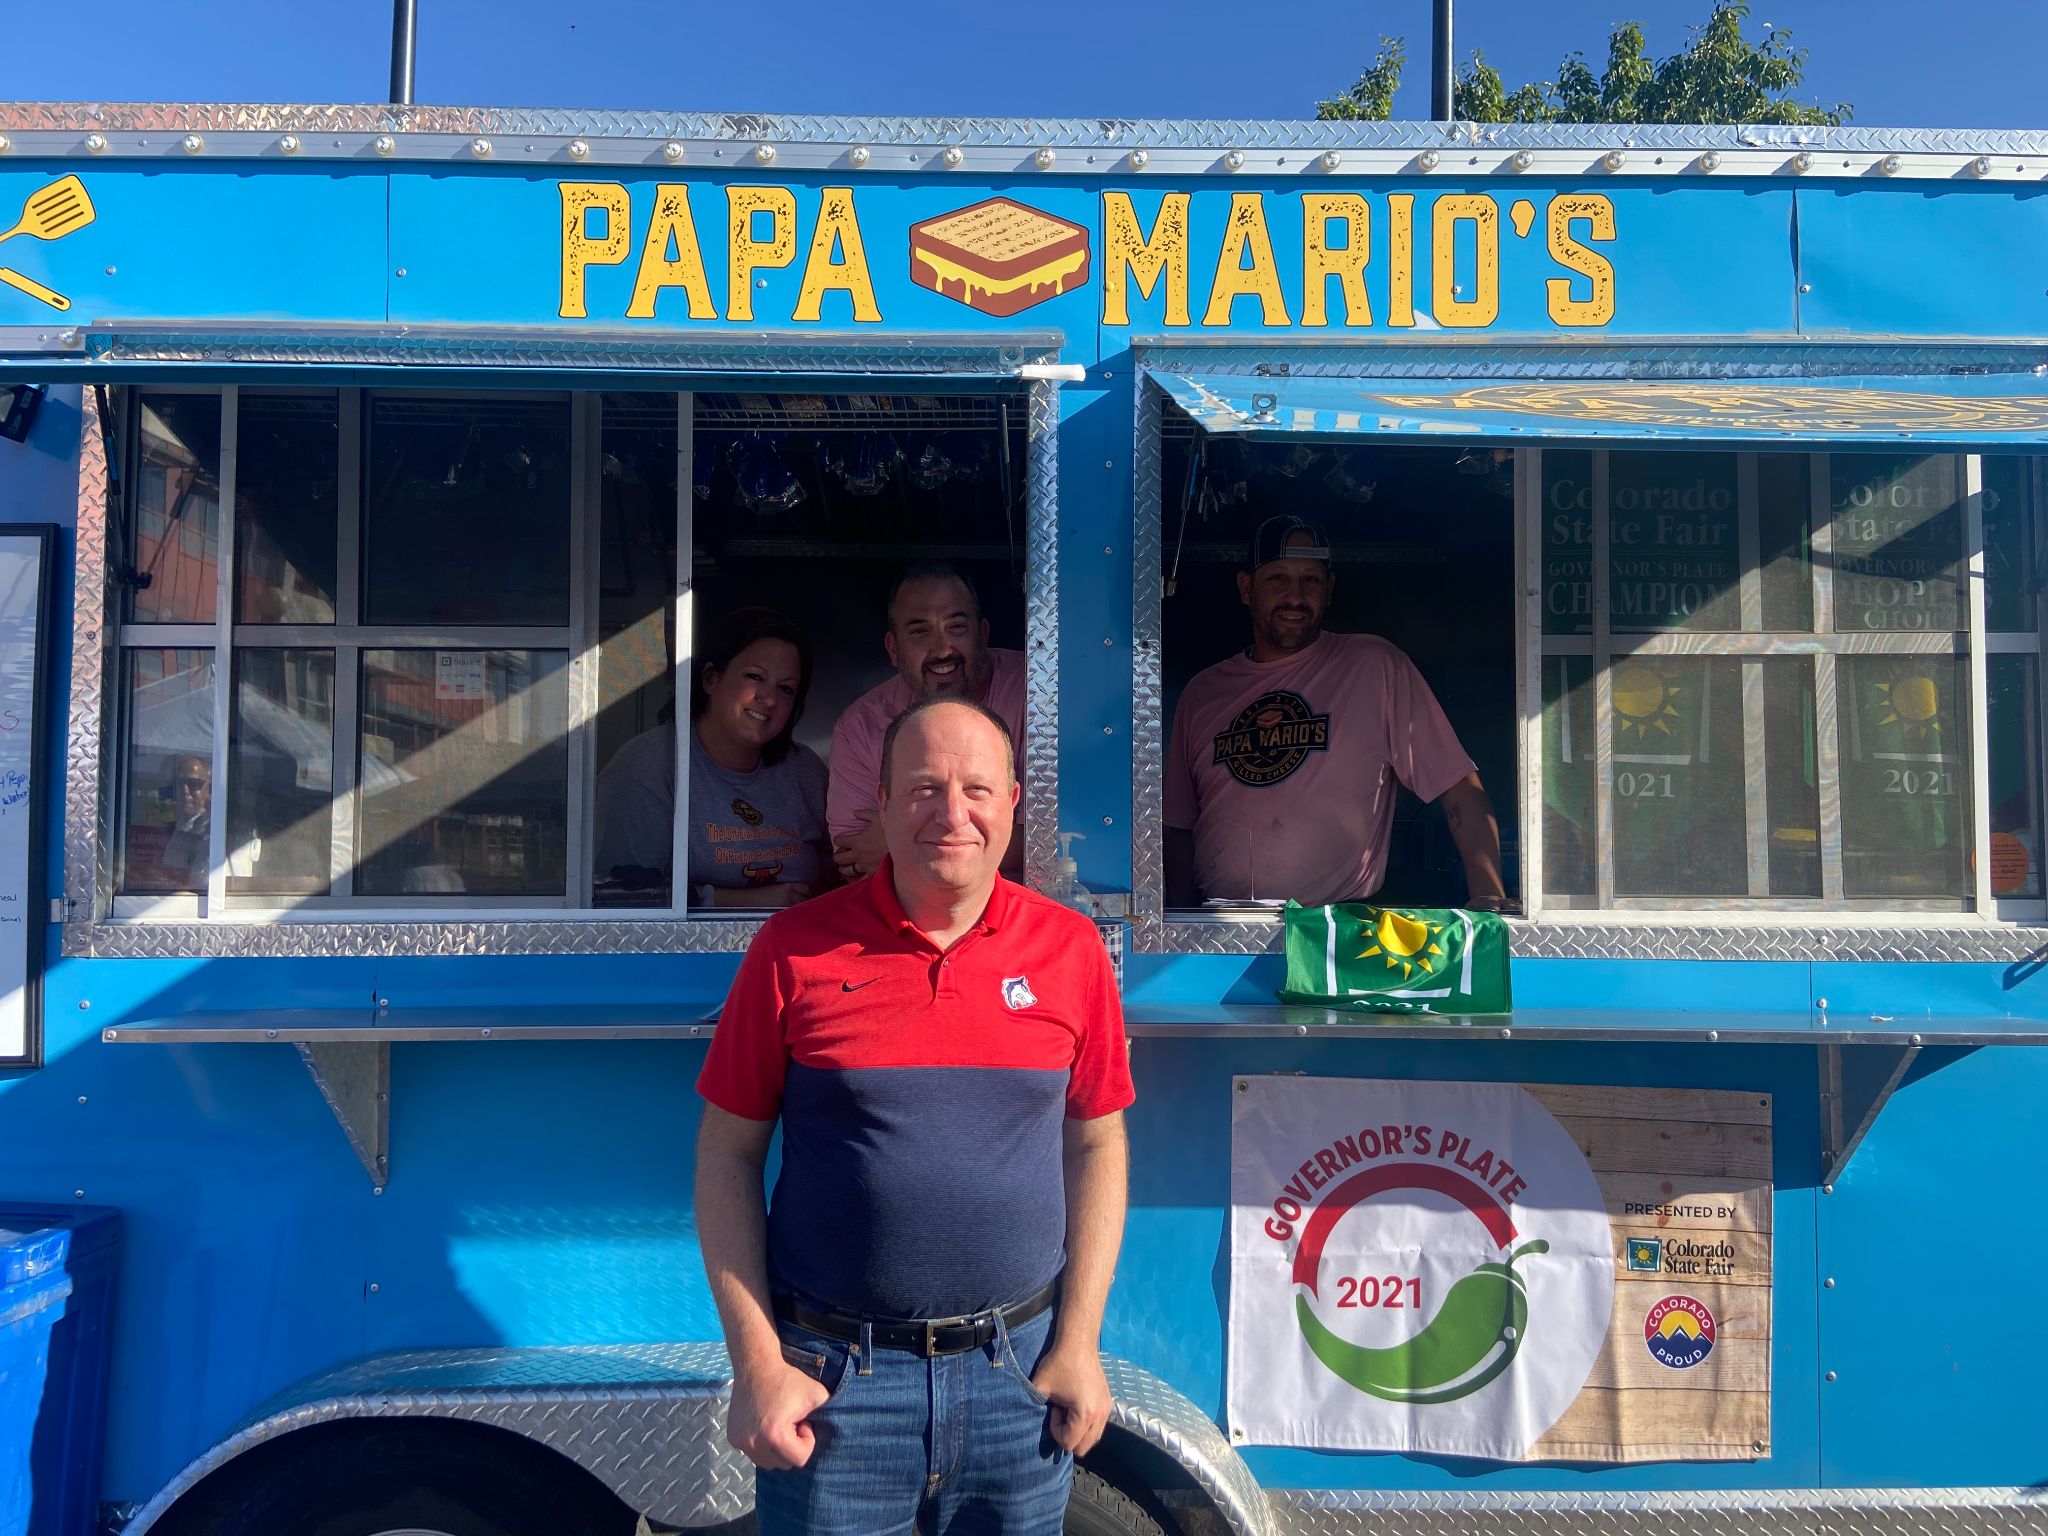 Governor Polis in front of the Papa Mario's food truck.